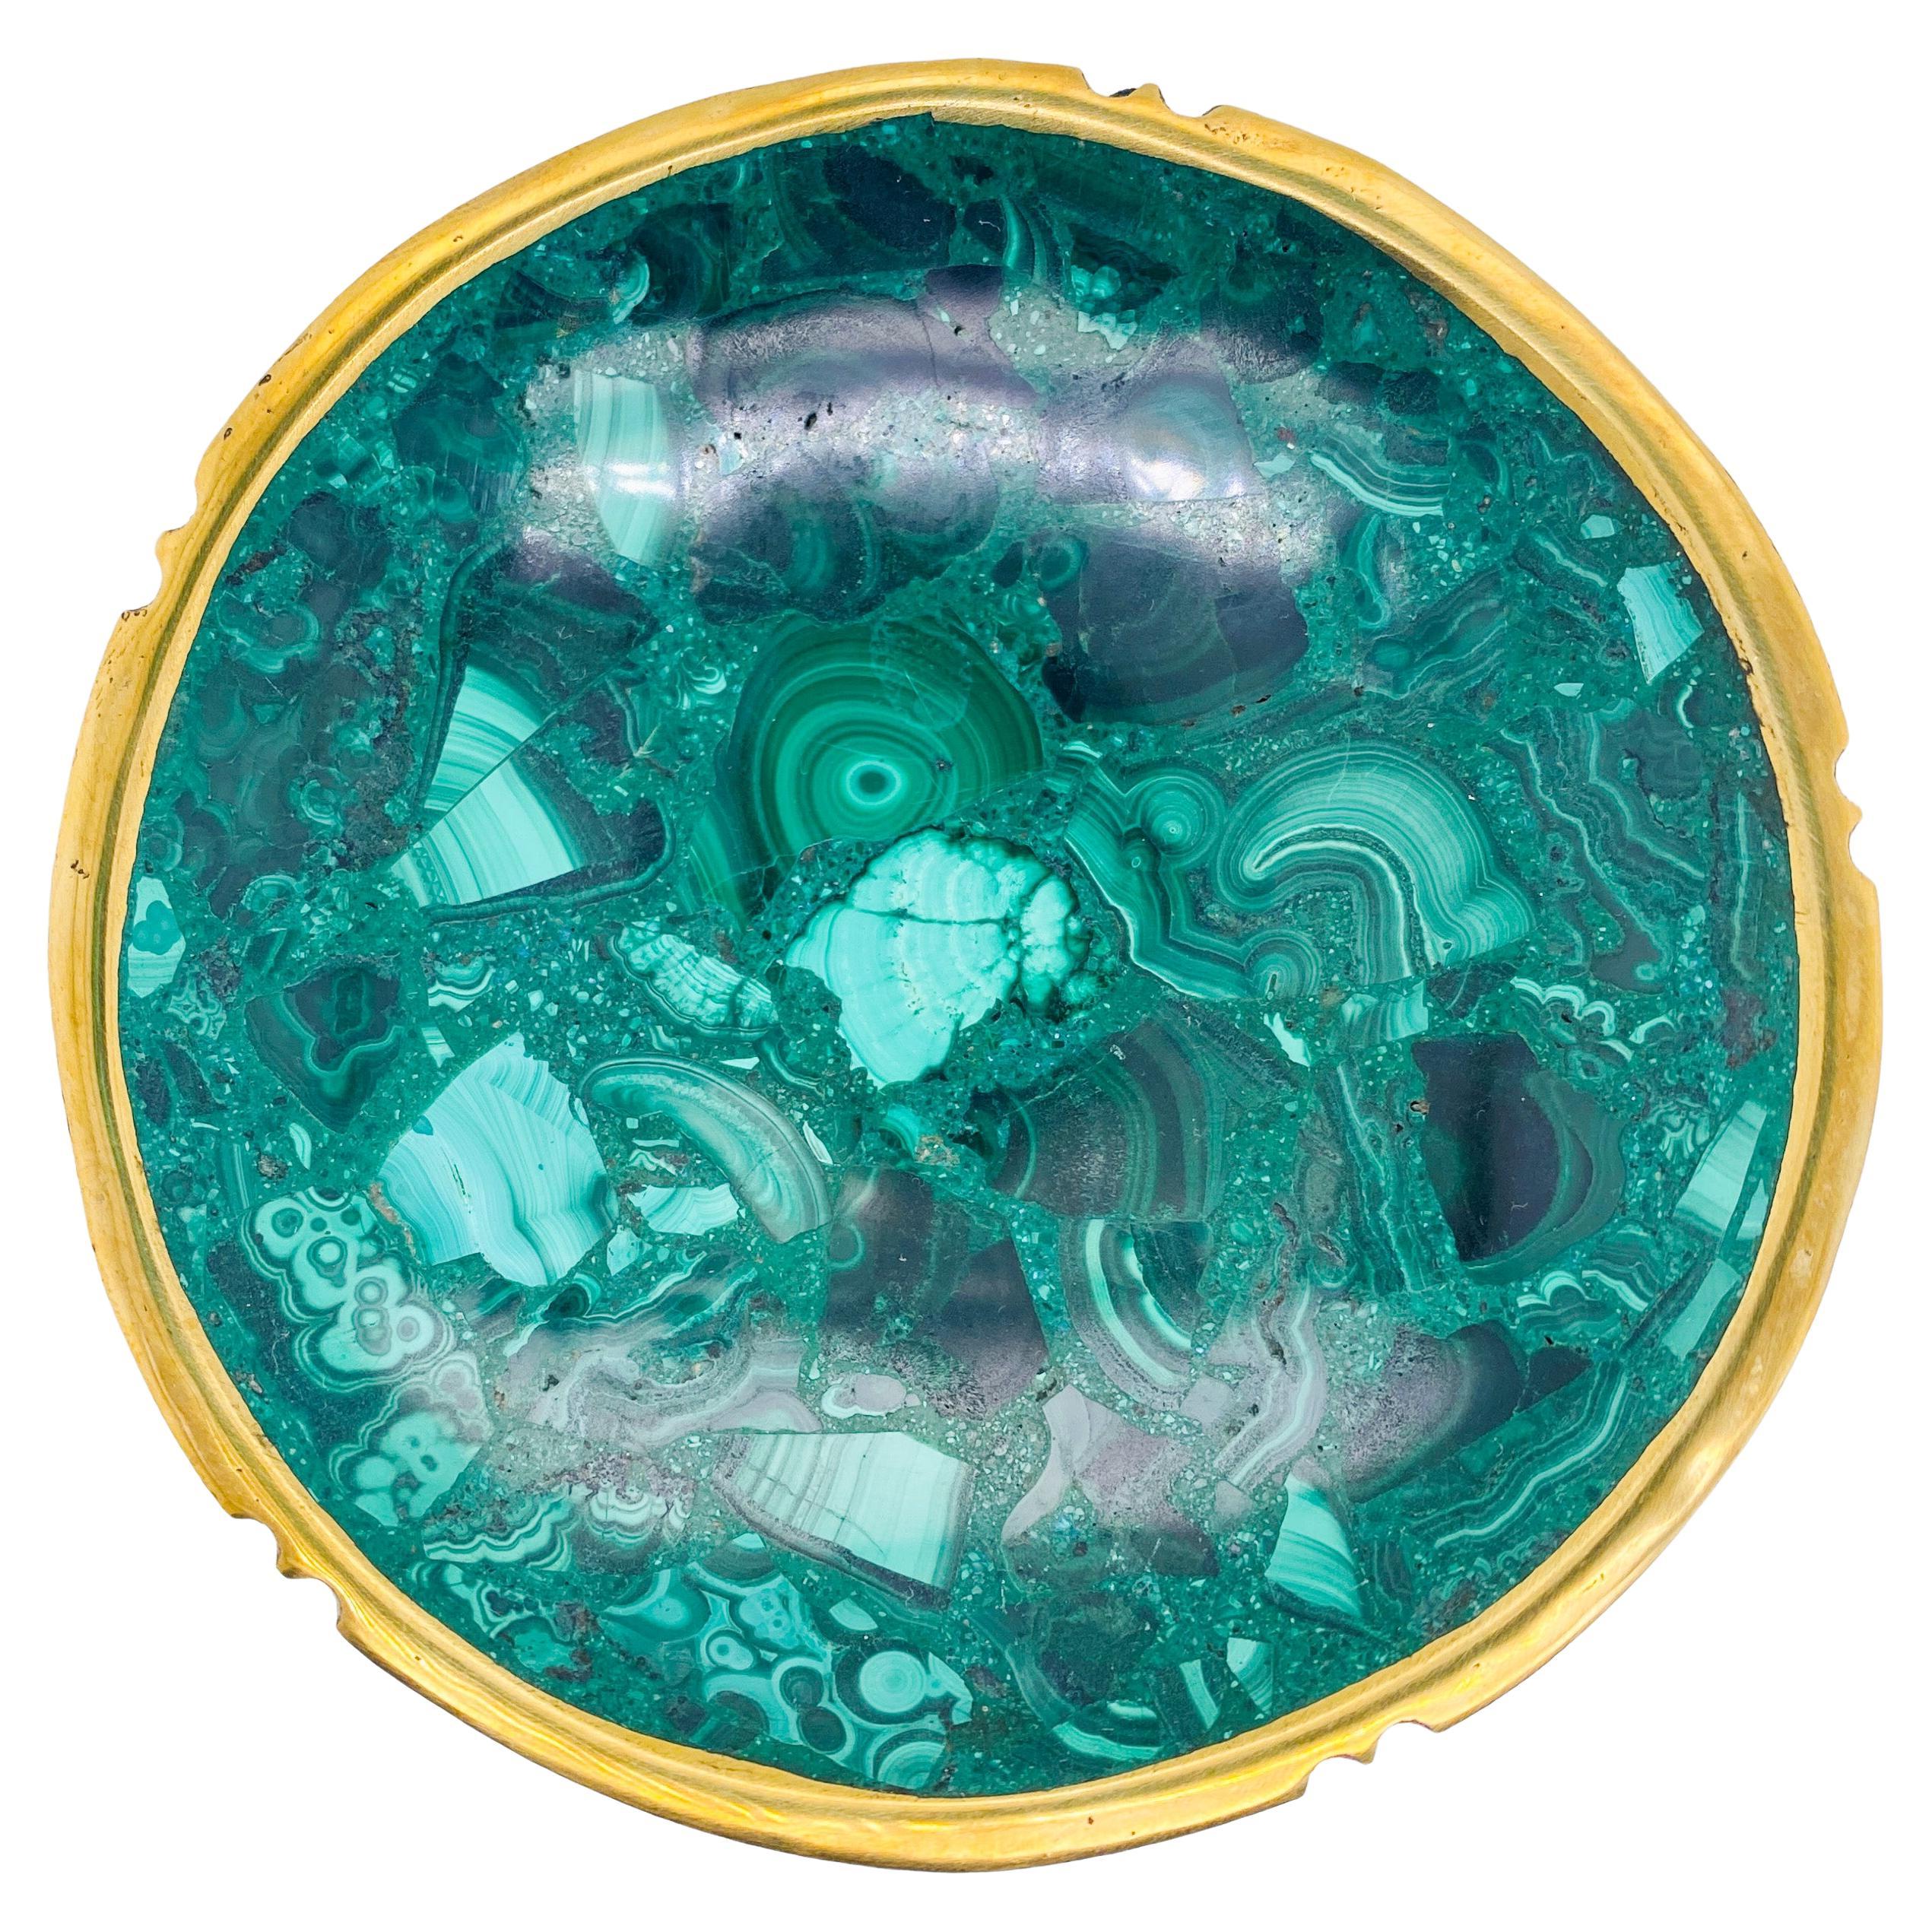 This gorgeous malachite dish is a magnificent velvety green statement piece. The bowl is created from beautiful malachite pieces that are pieced together and carved and polished to perfection. The round 4 inch malachite bowl sits 1 inch high. This